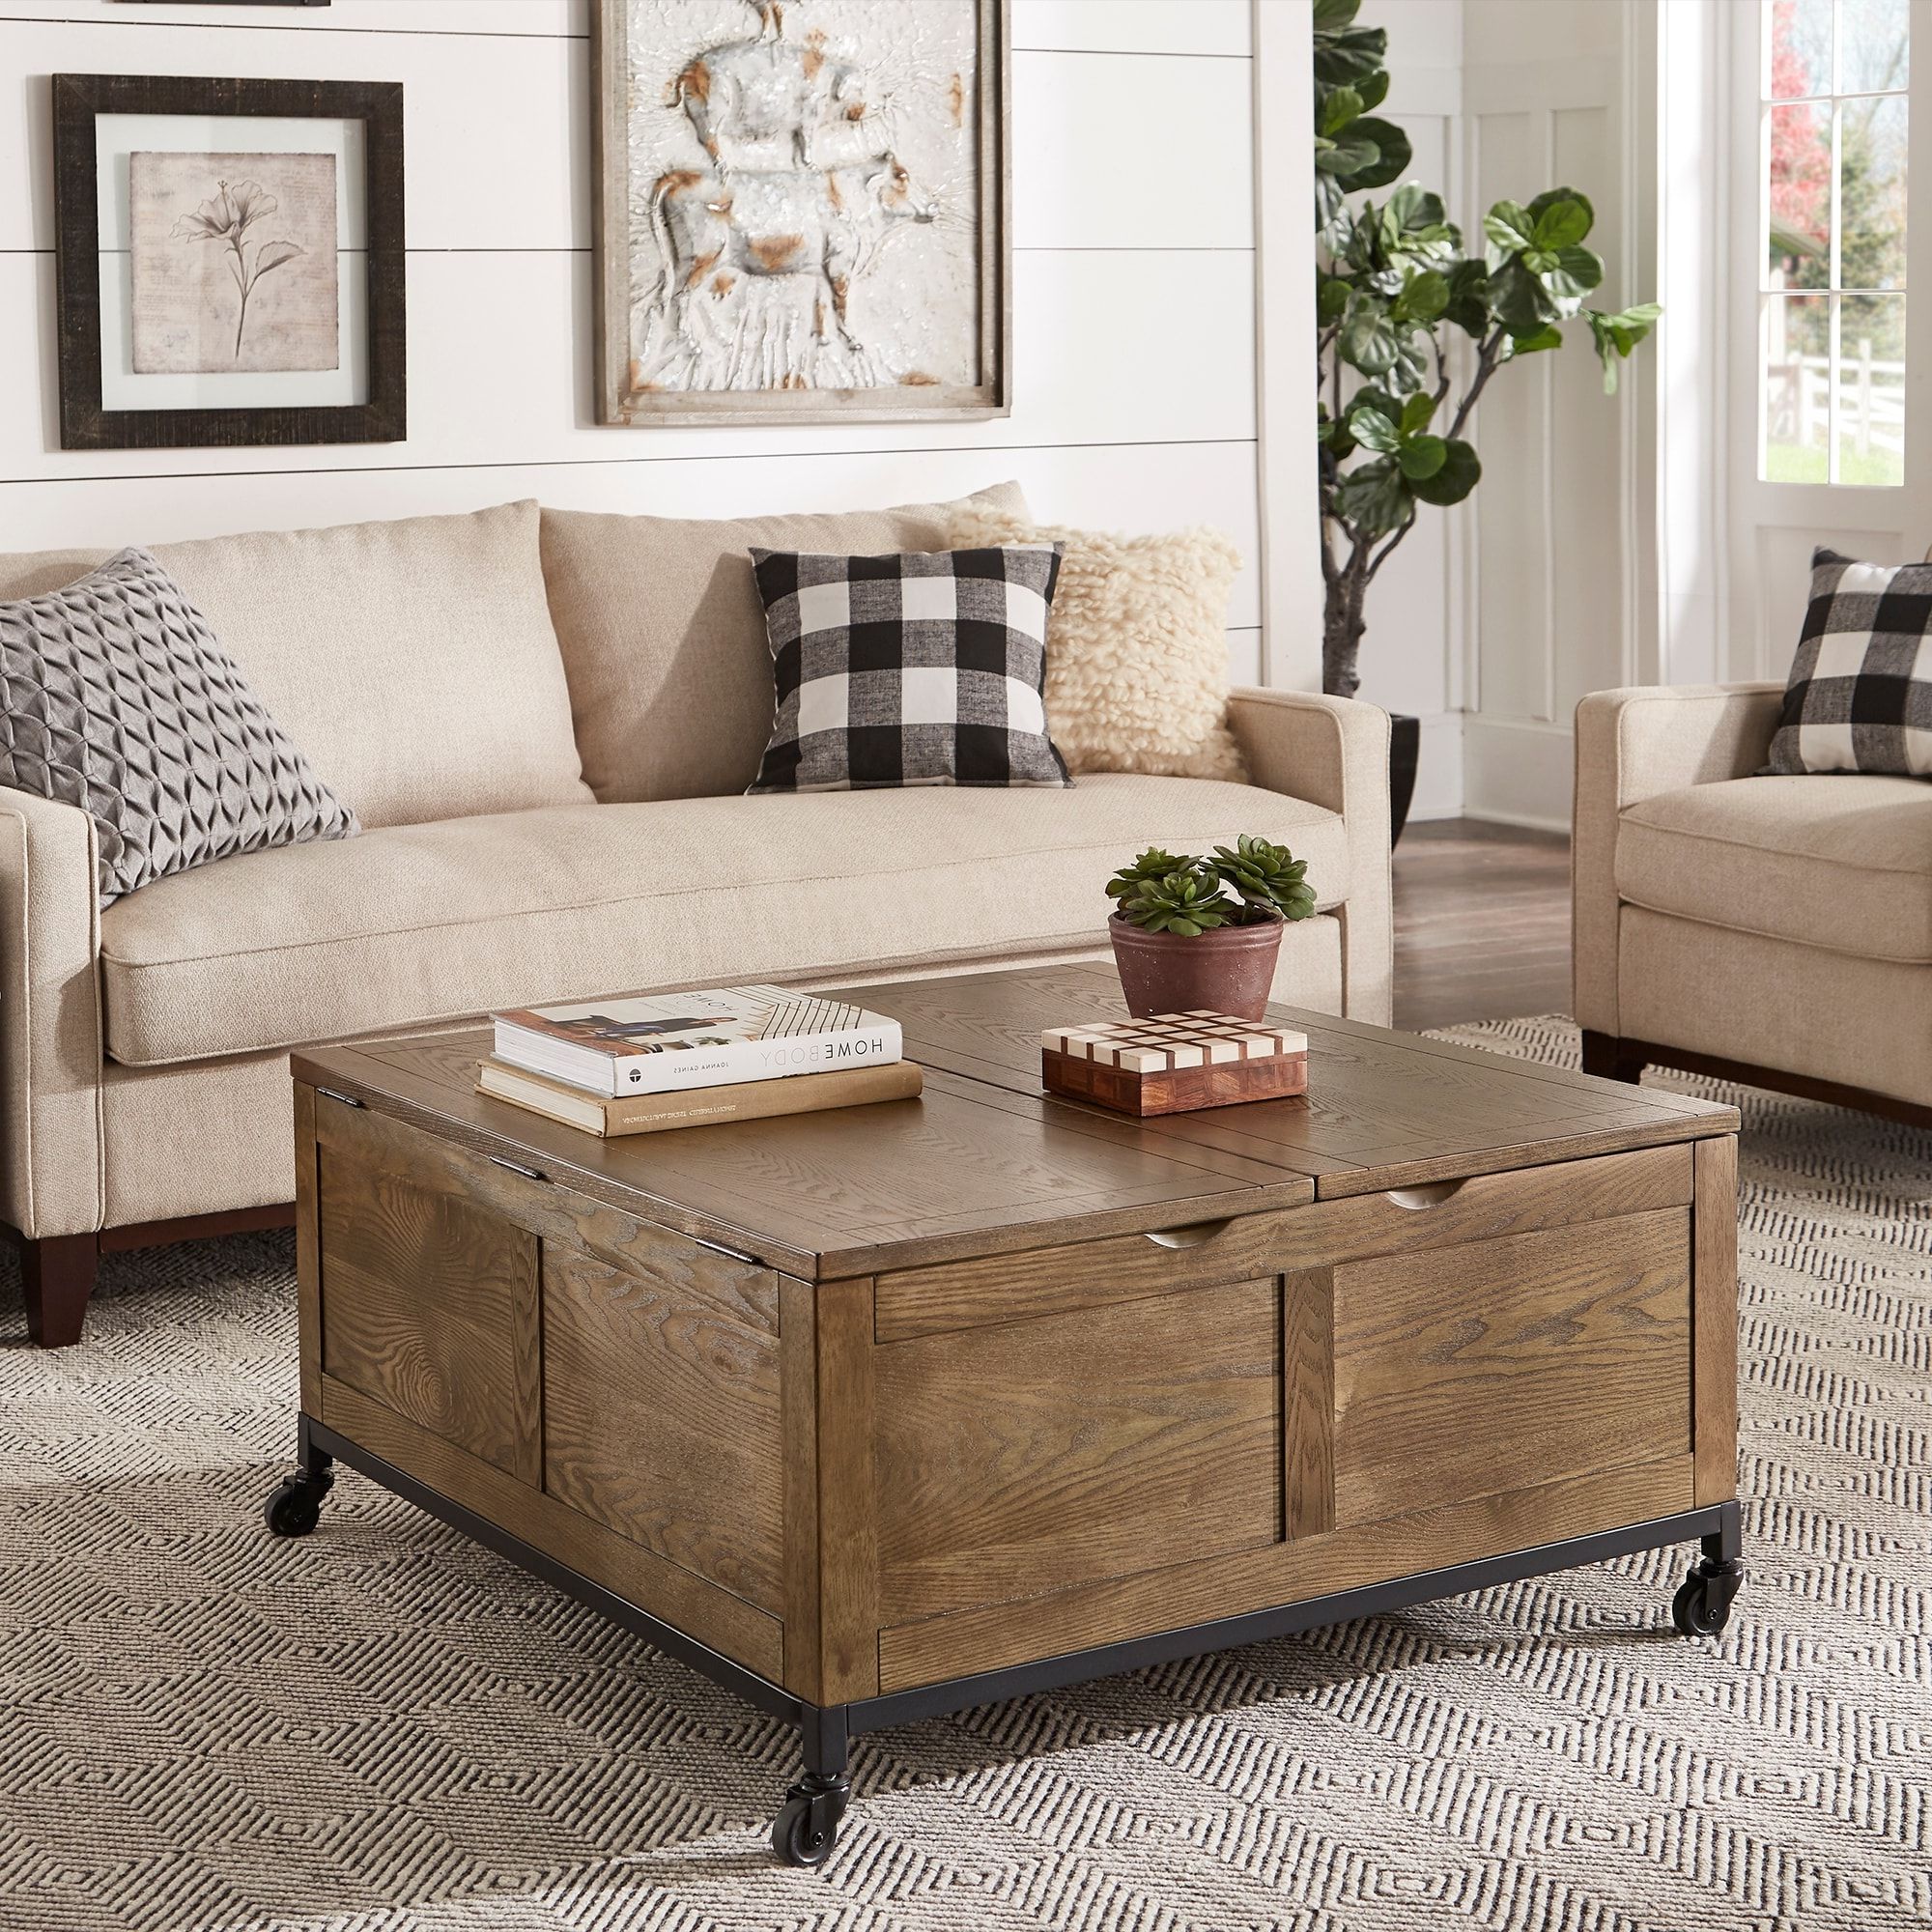 Shay Square Storage Trunk Coffee Table With Caster Wheelsinspire Q  Artisan – On Sale – Bed Bath & Beyond – 22408031 For Preferred Coffee Tables With Casters (View 2 of 10)